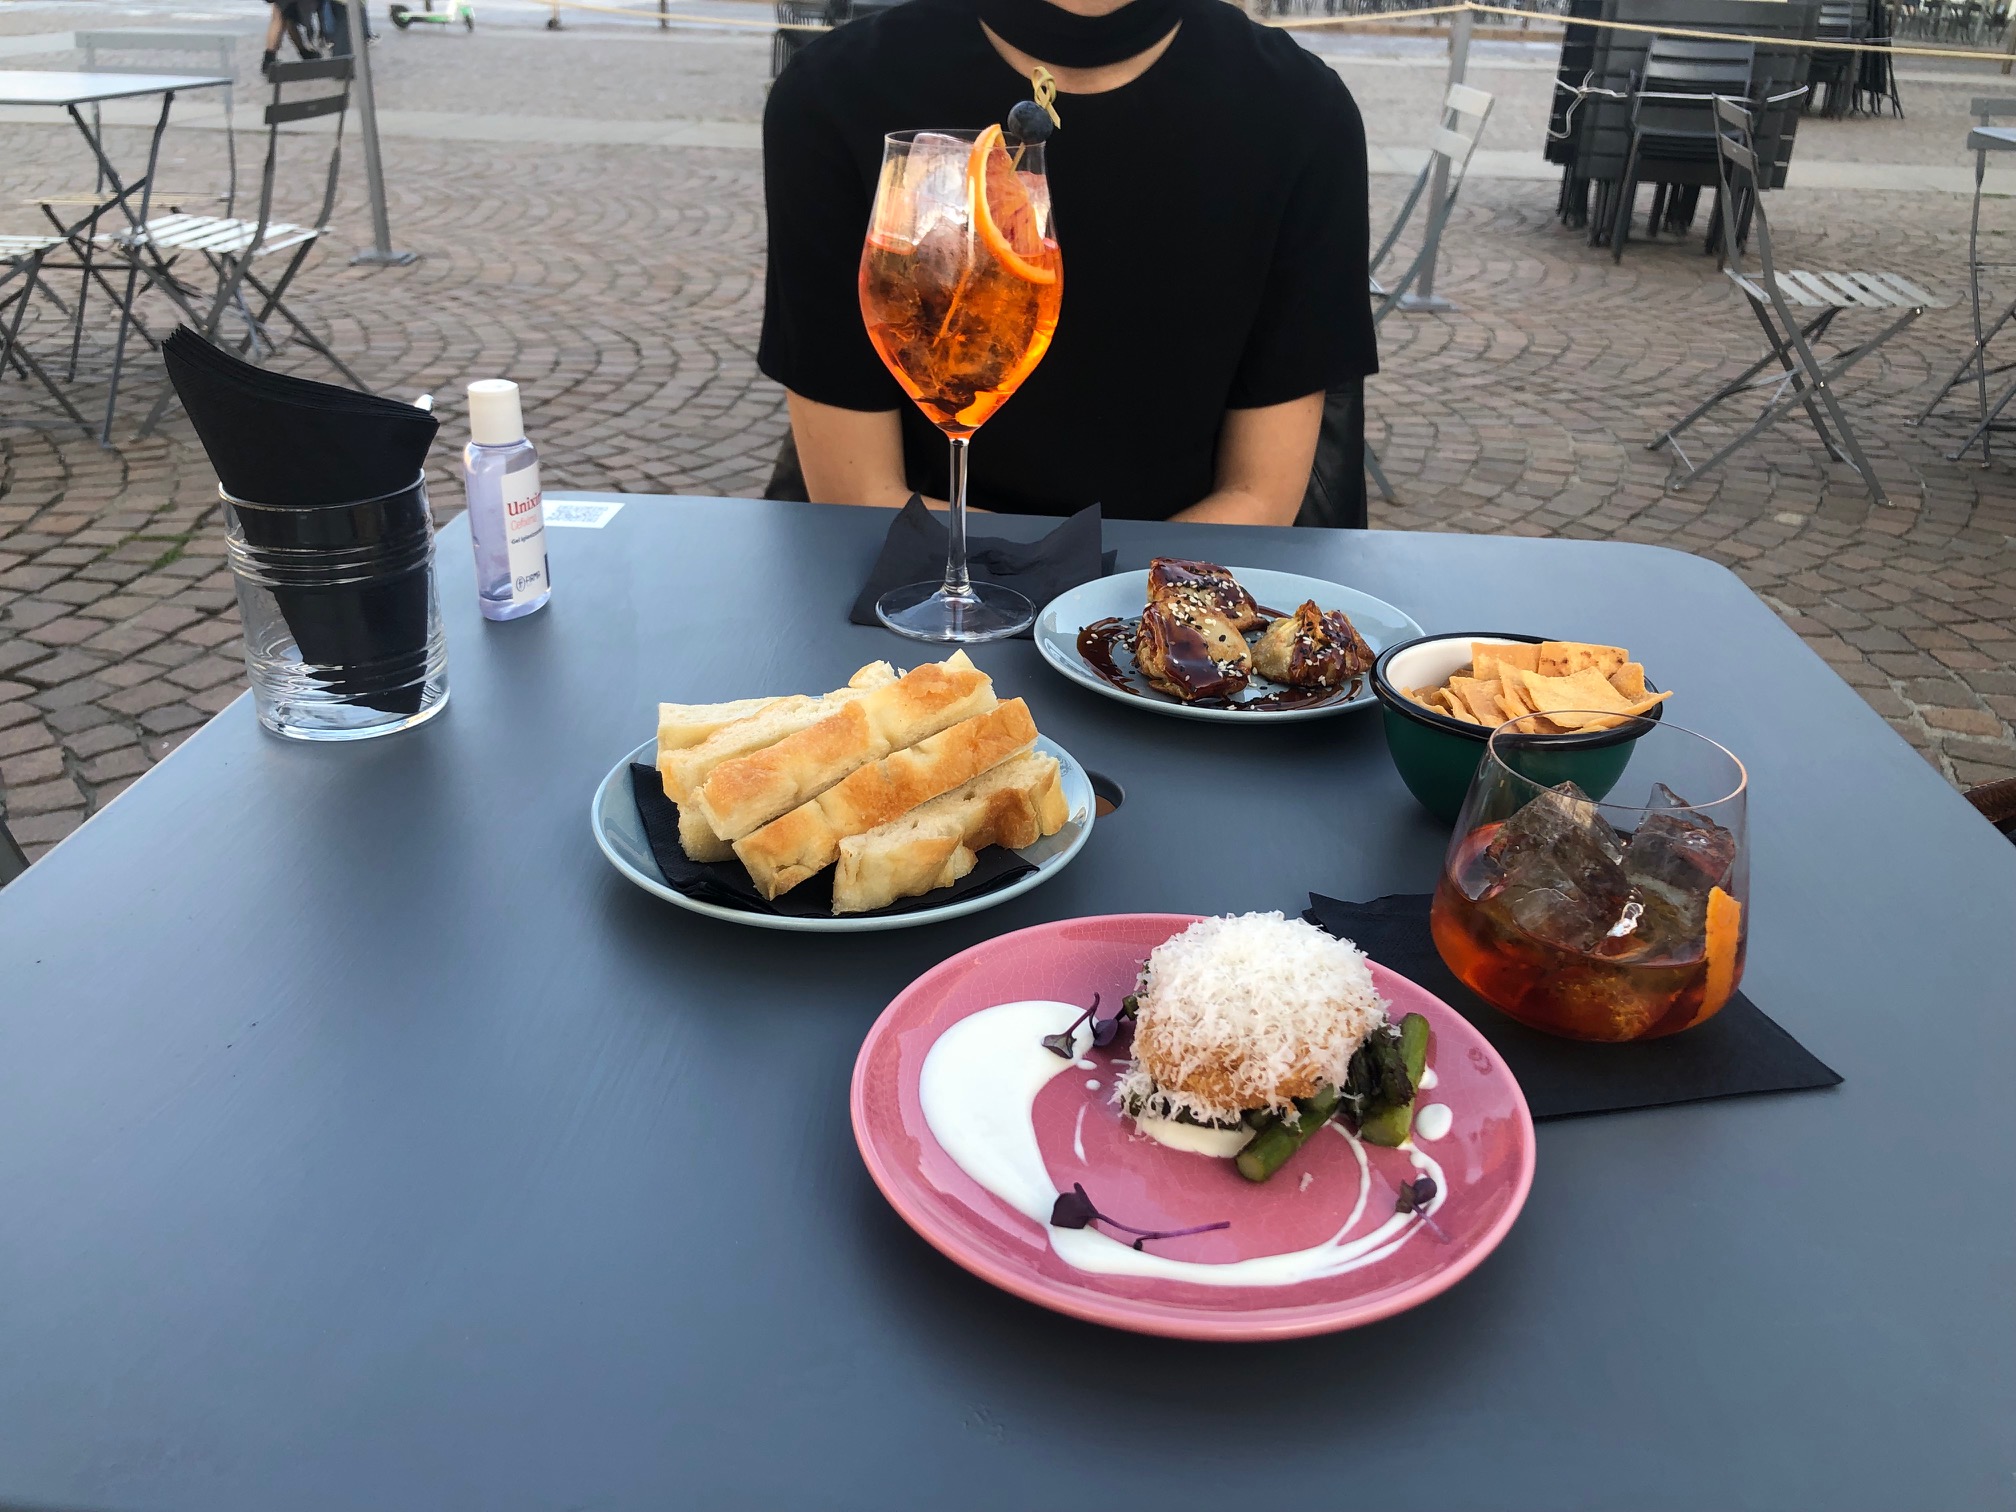 food and drinks at Drogheria bar in Turin during aperitivo